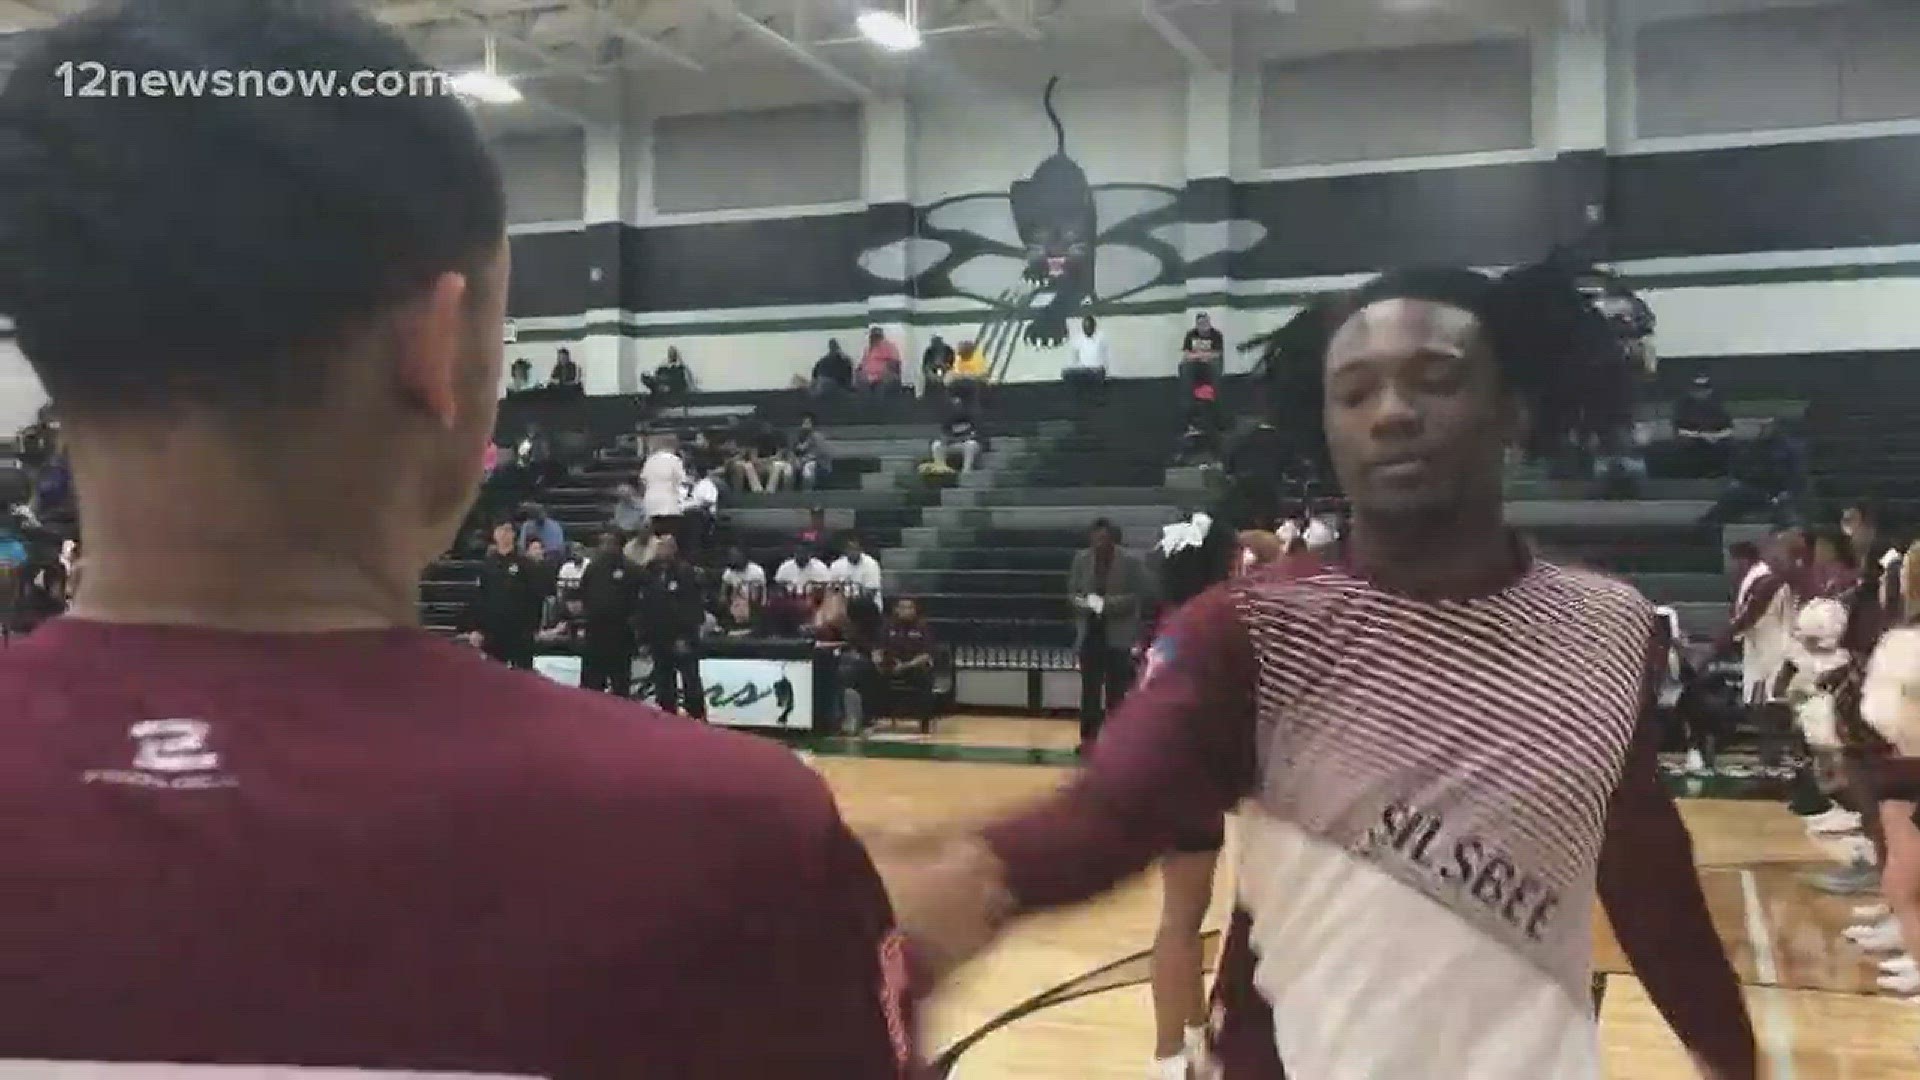 It was a 30 point win for the Tigers tonight; Silsbee will play Huntington on Monday night.